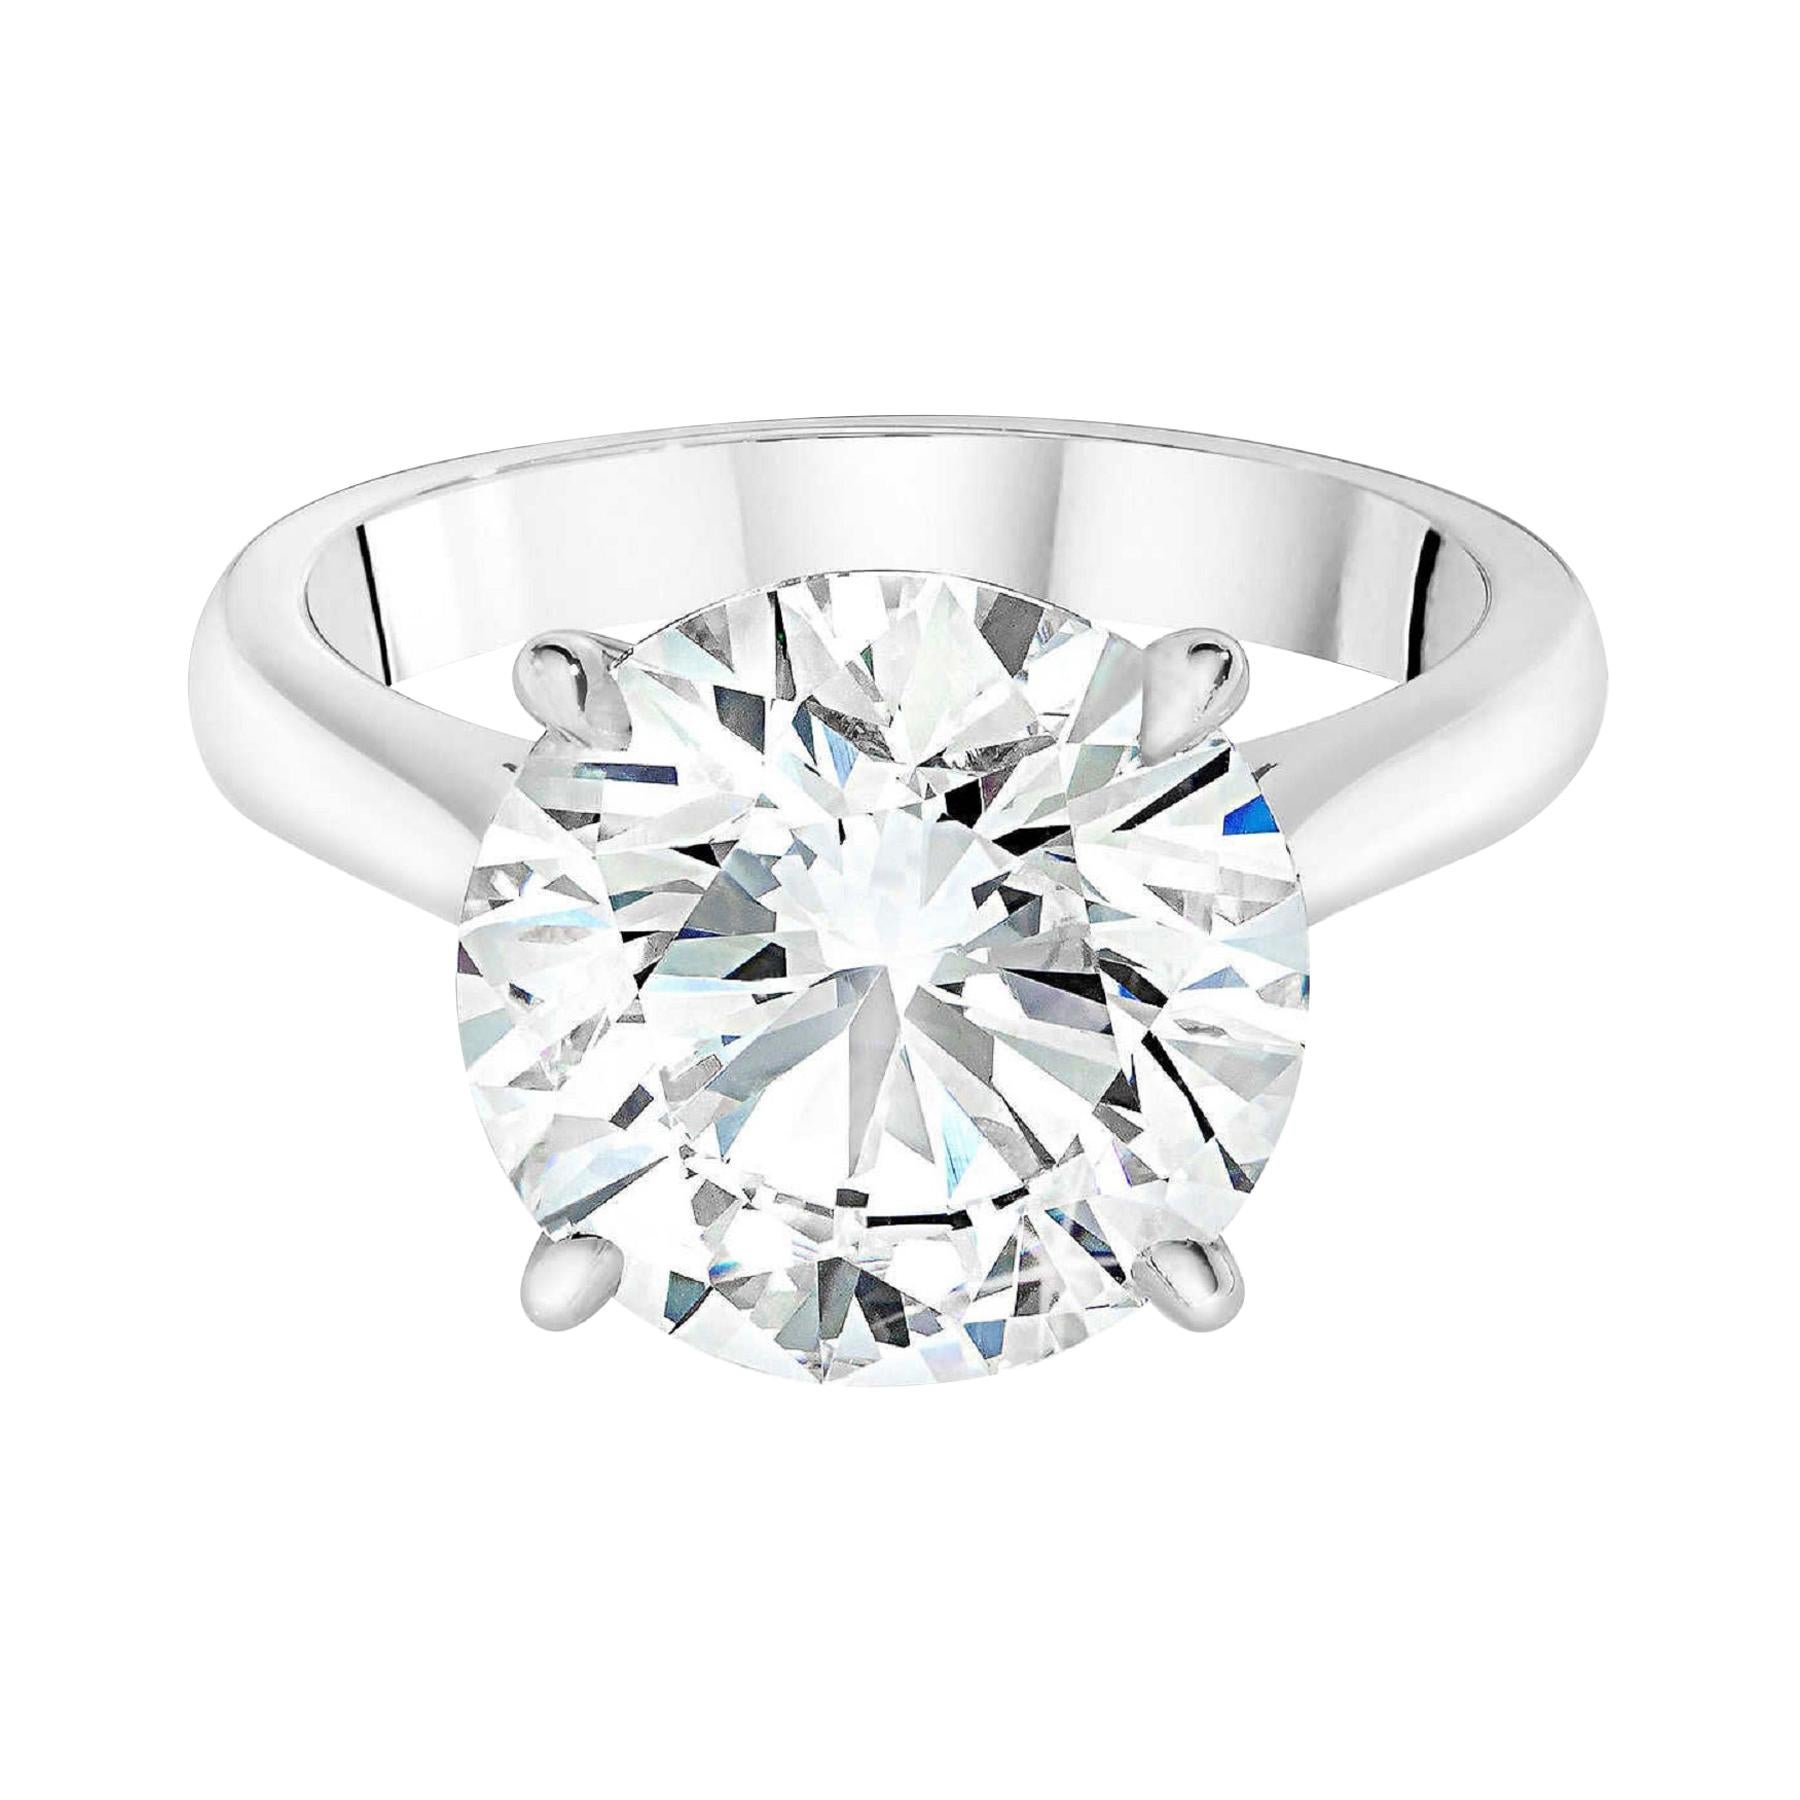 I FLAWLESS GIA Certified 7.52 Carat Solitaire Engagement Platinum Ring